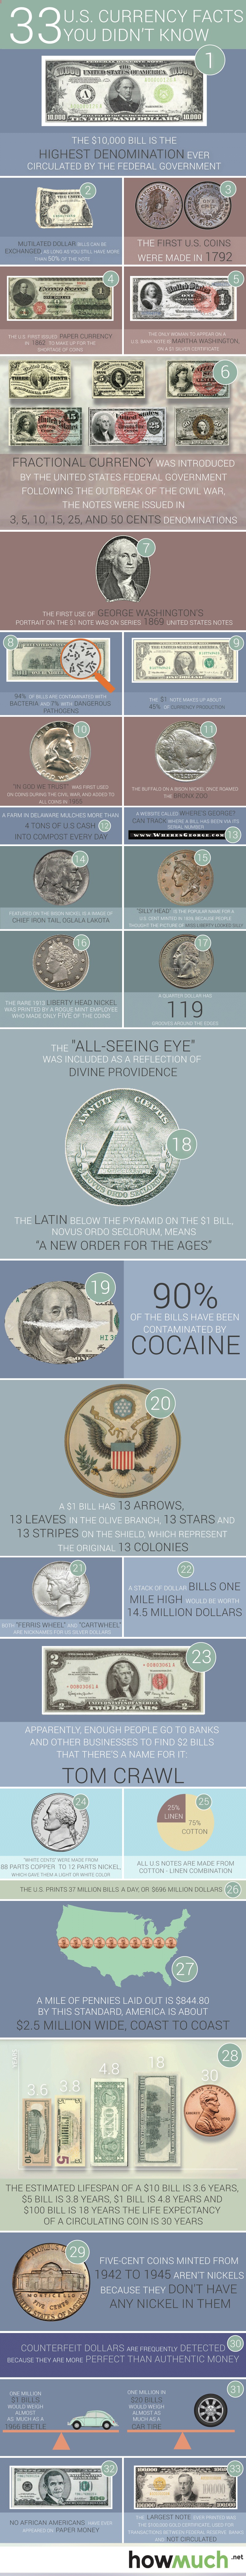 us-currency-full-infographic